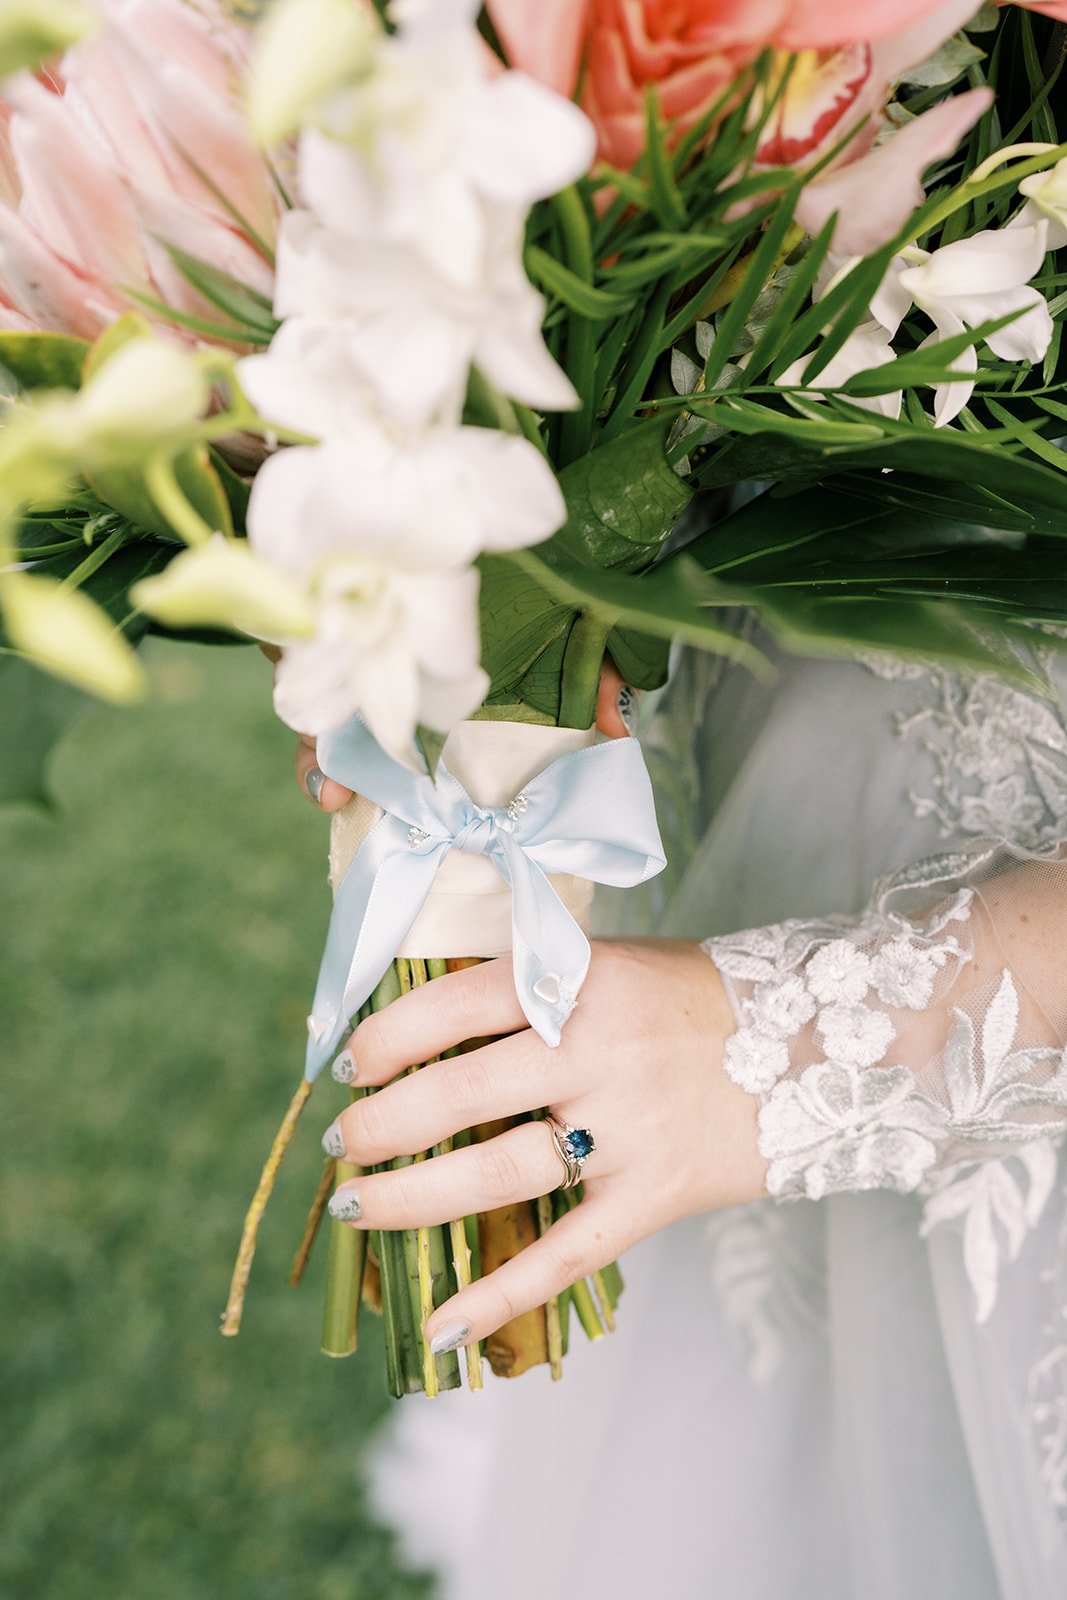 A bride holding a bouquet of pink and blue flowers.